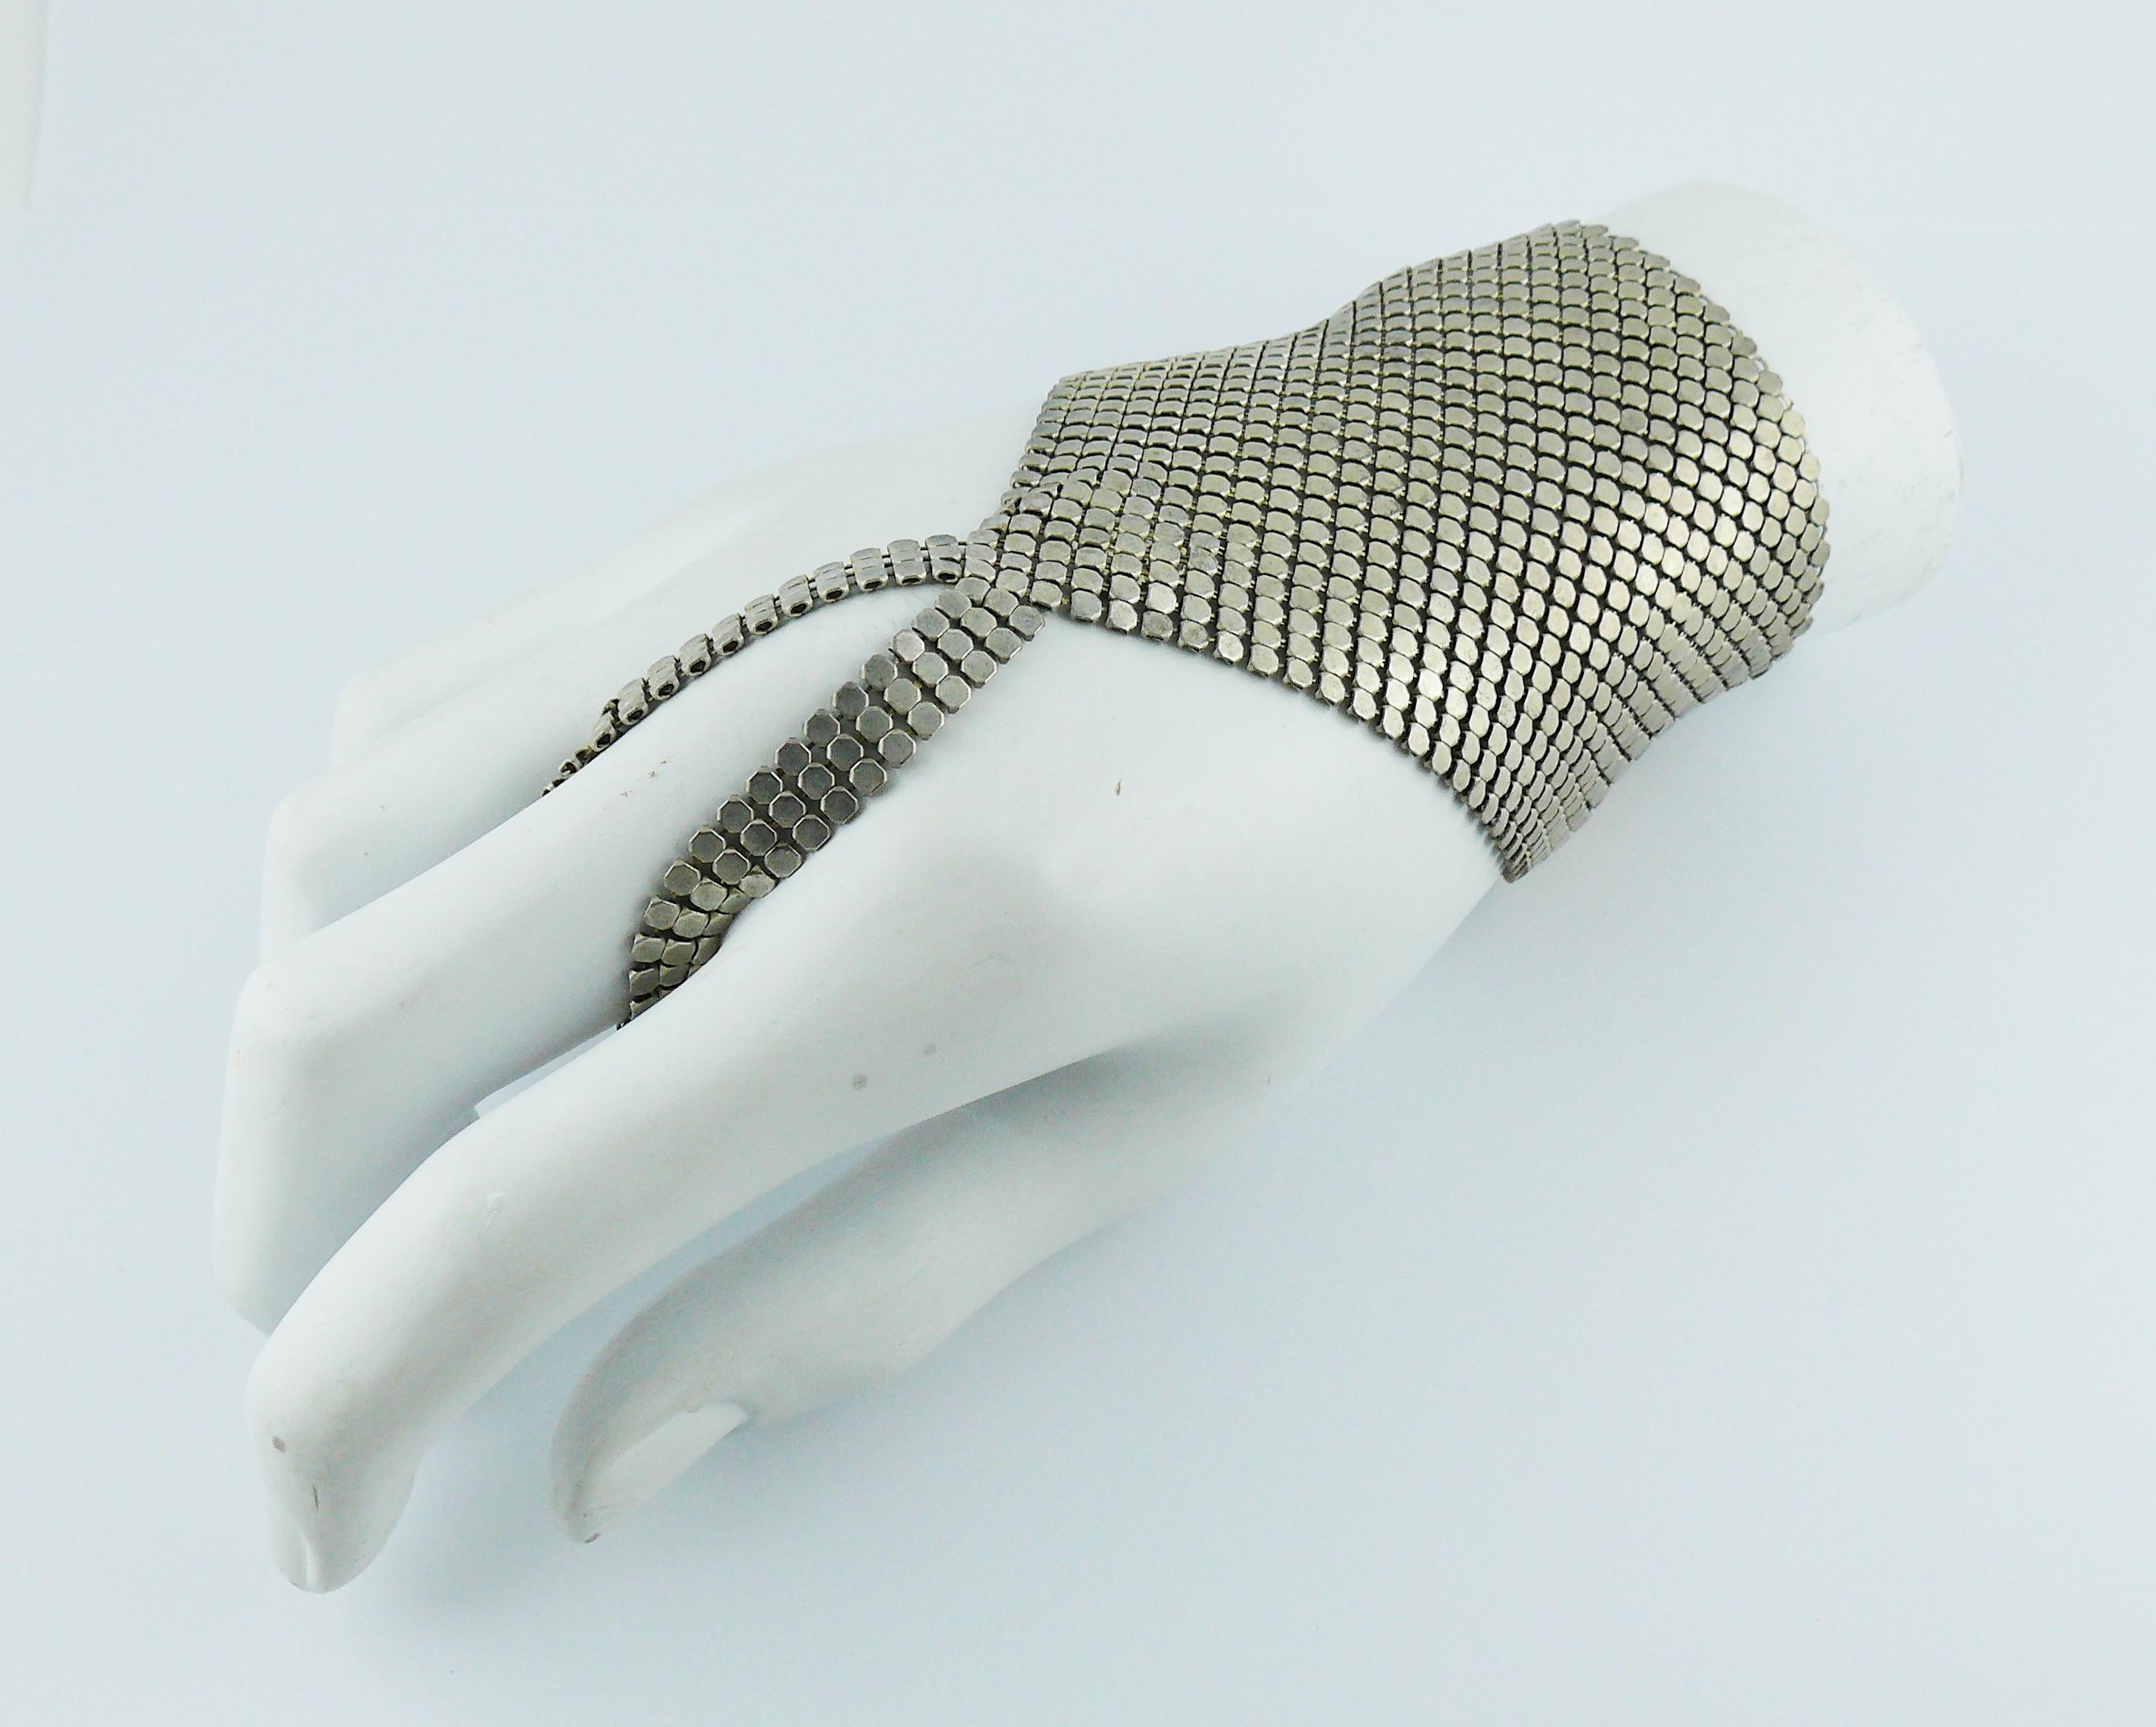 PACO RABANNE vintage silver toned hand mesh ring.

Snap button closure.

Embossed PACO - PACO RABANNE.

Indicative measurements : max. width approx. 16 cm (6.30 inches).

JEWELRY CONDITION CHART
- New or never worn : item is in pristine condition